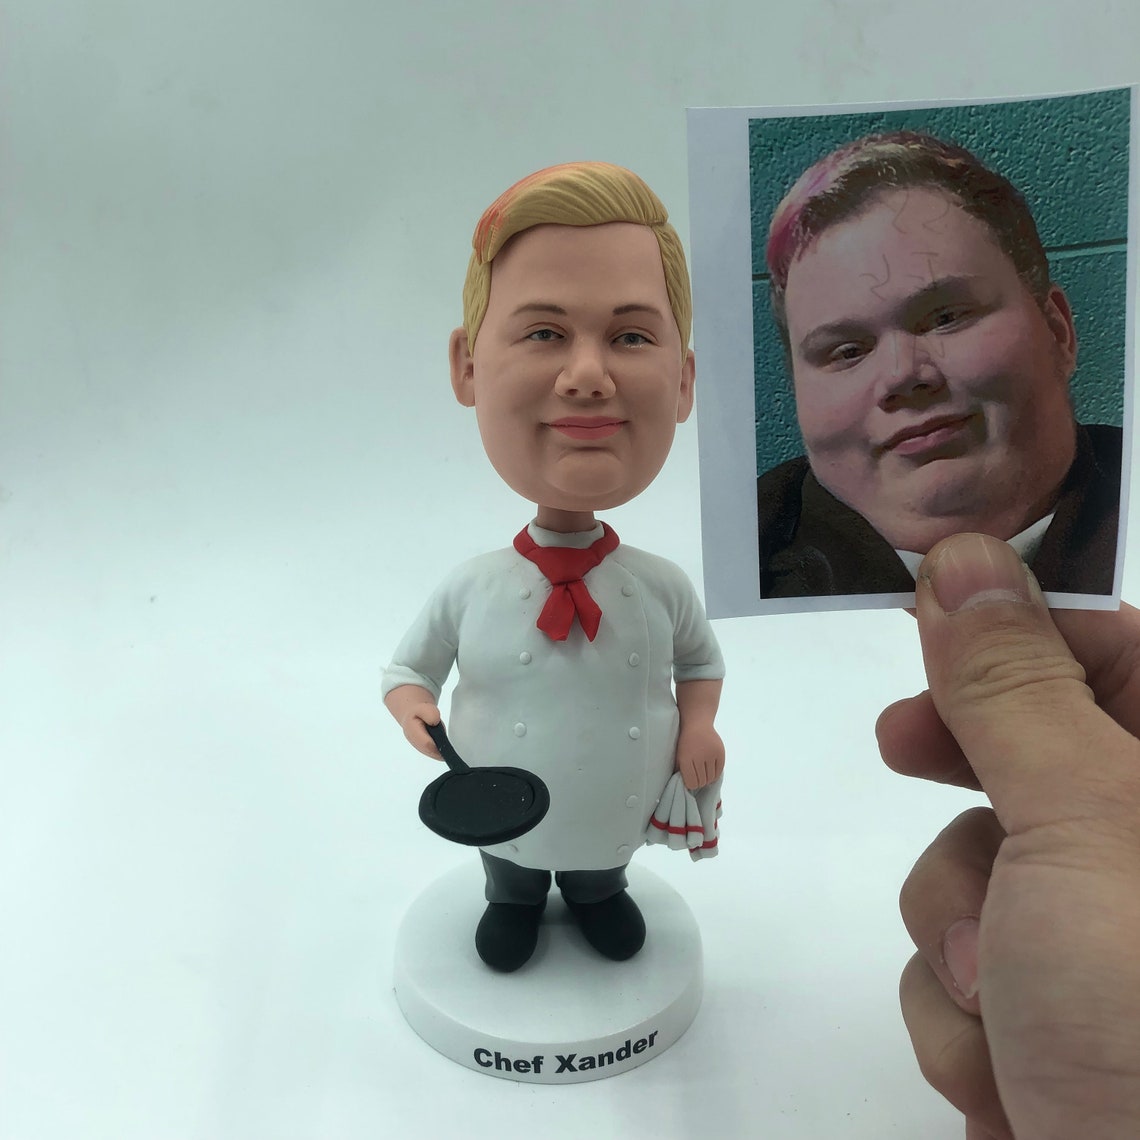 Bobbleheads beloved by fans